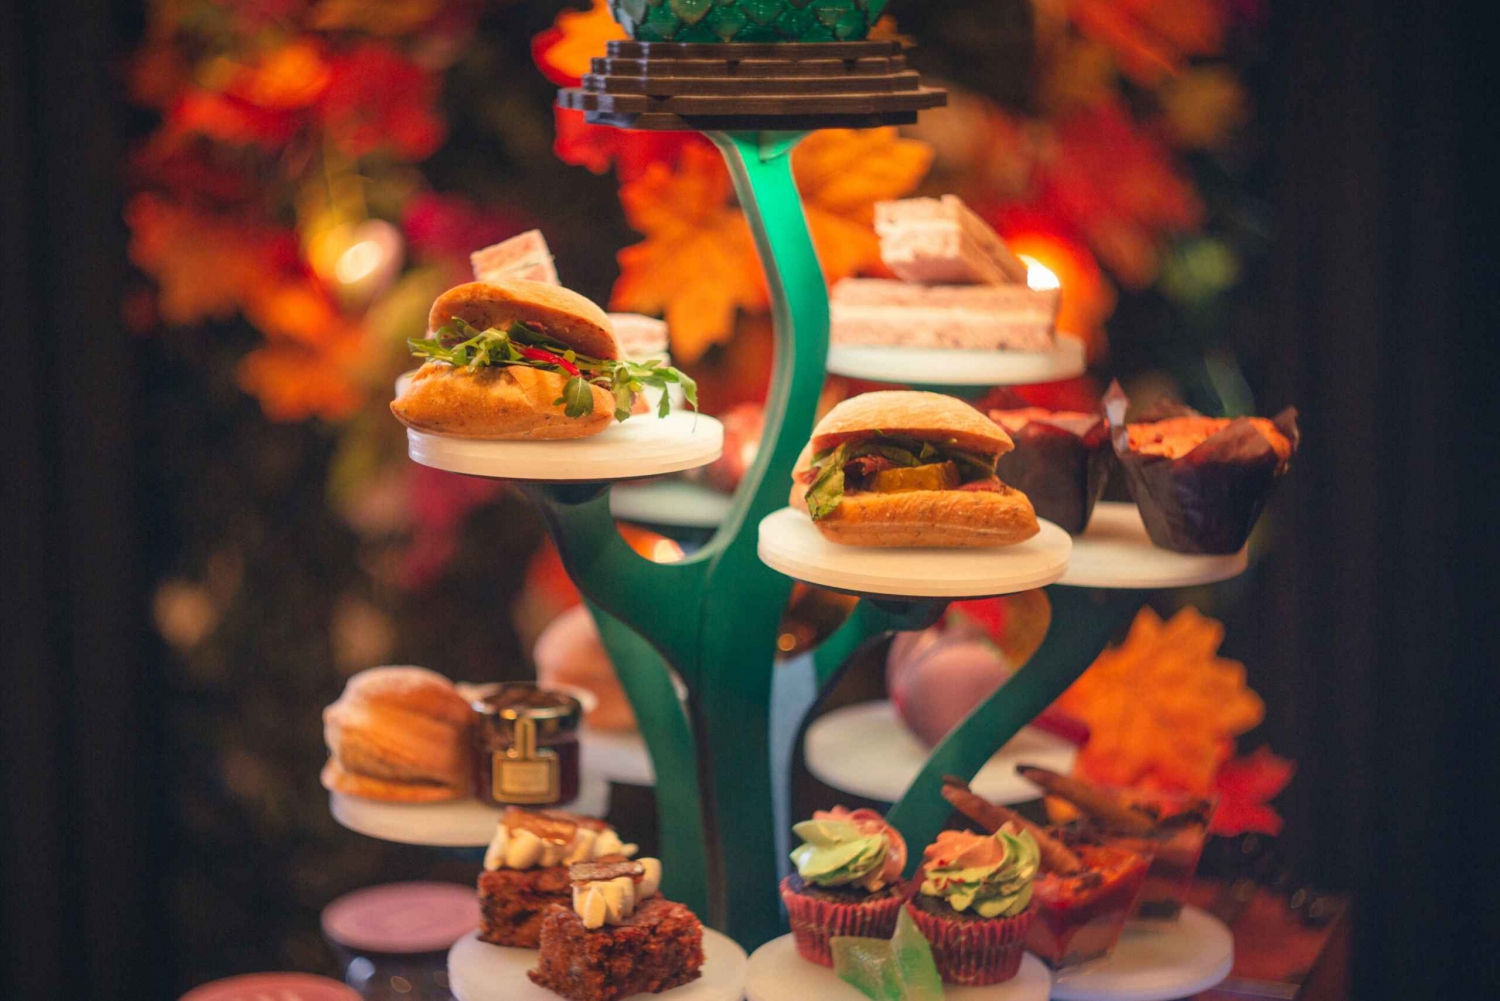 London: Harry Potter Walking Tour with Magical Afternoon Tea